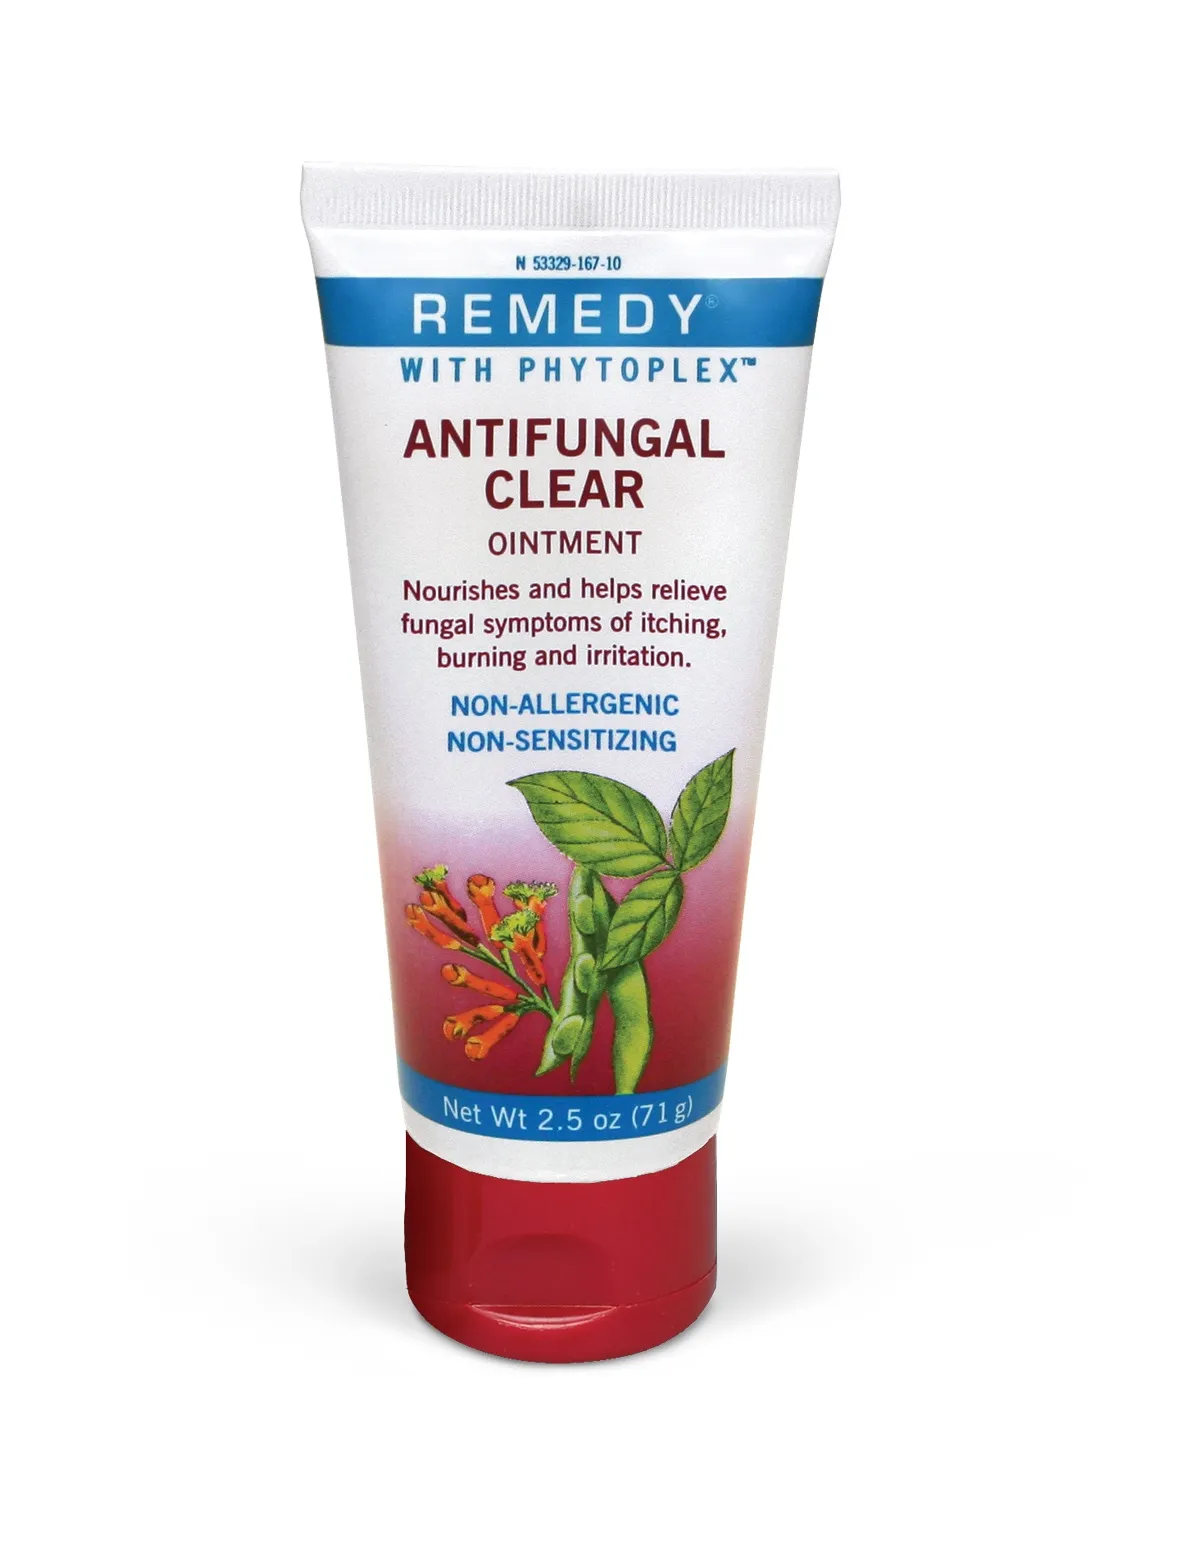 Medline - Remedy Phytoplex - From: MSC092625 To: MSC092625H -  Antifungal Ointment